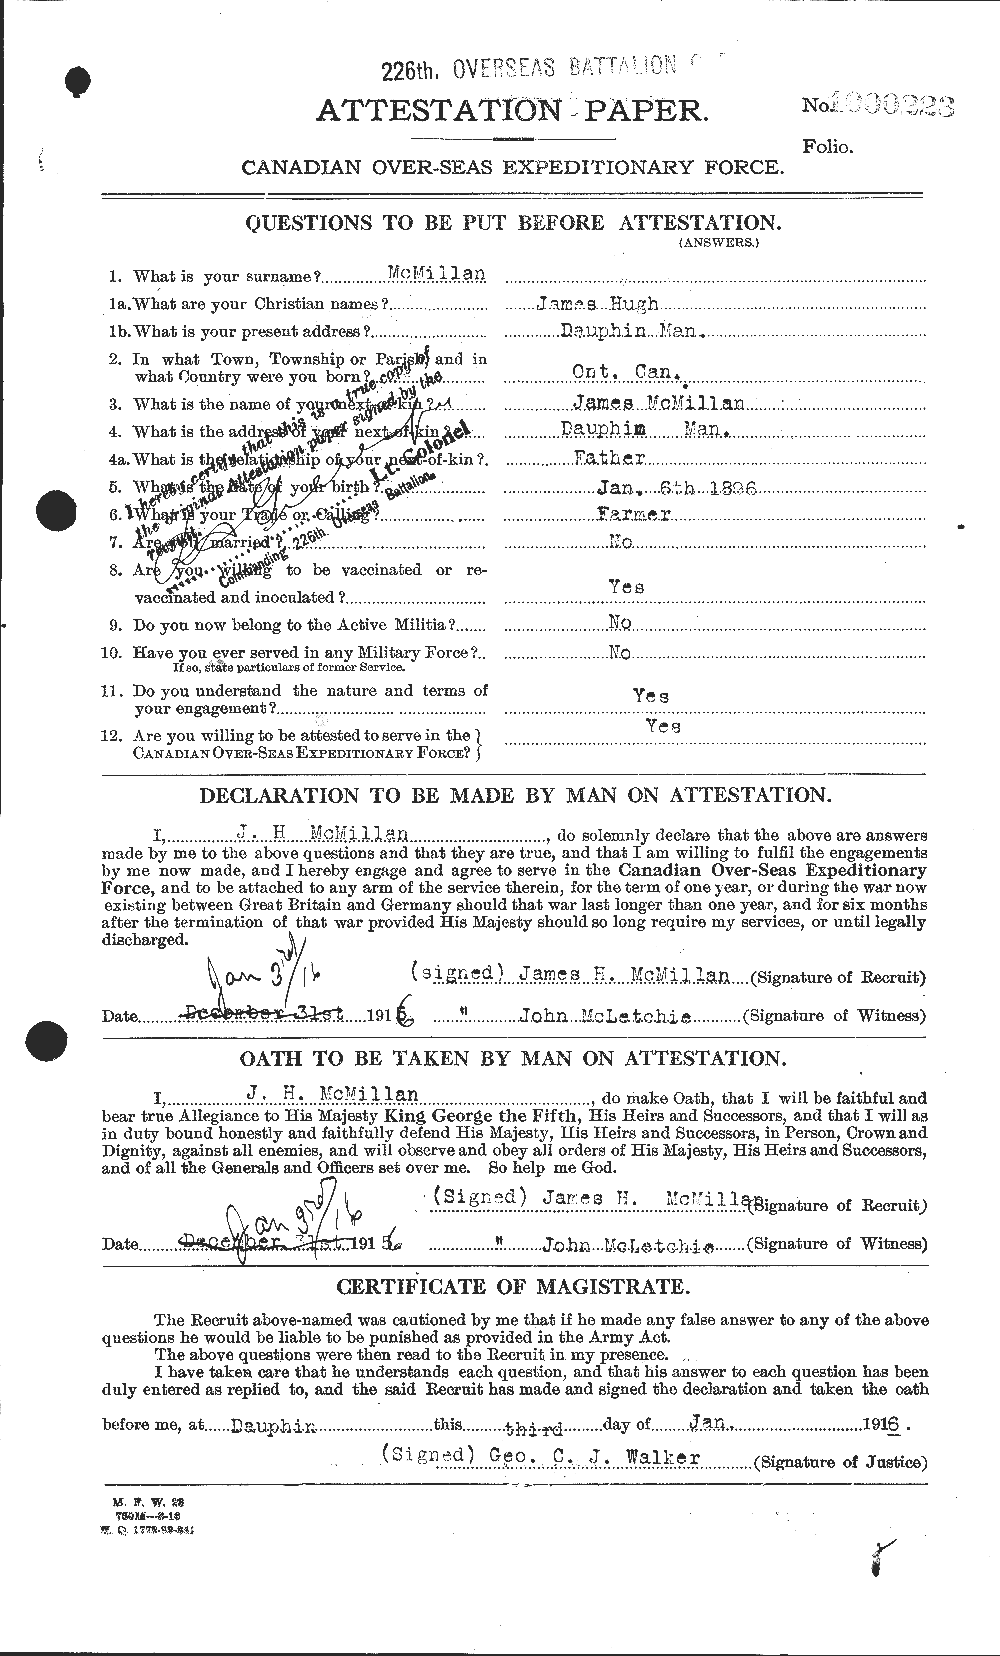 Personnel Records of the First World War - CEF 543947a